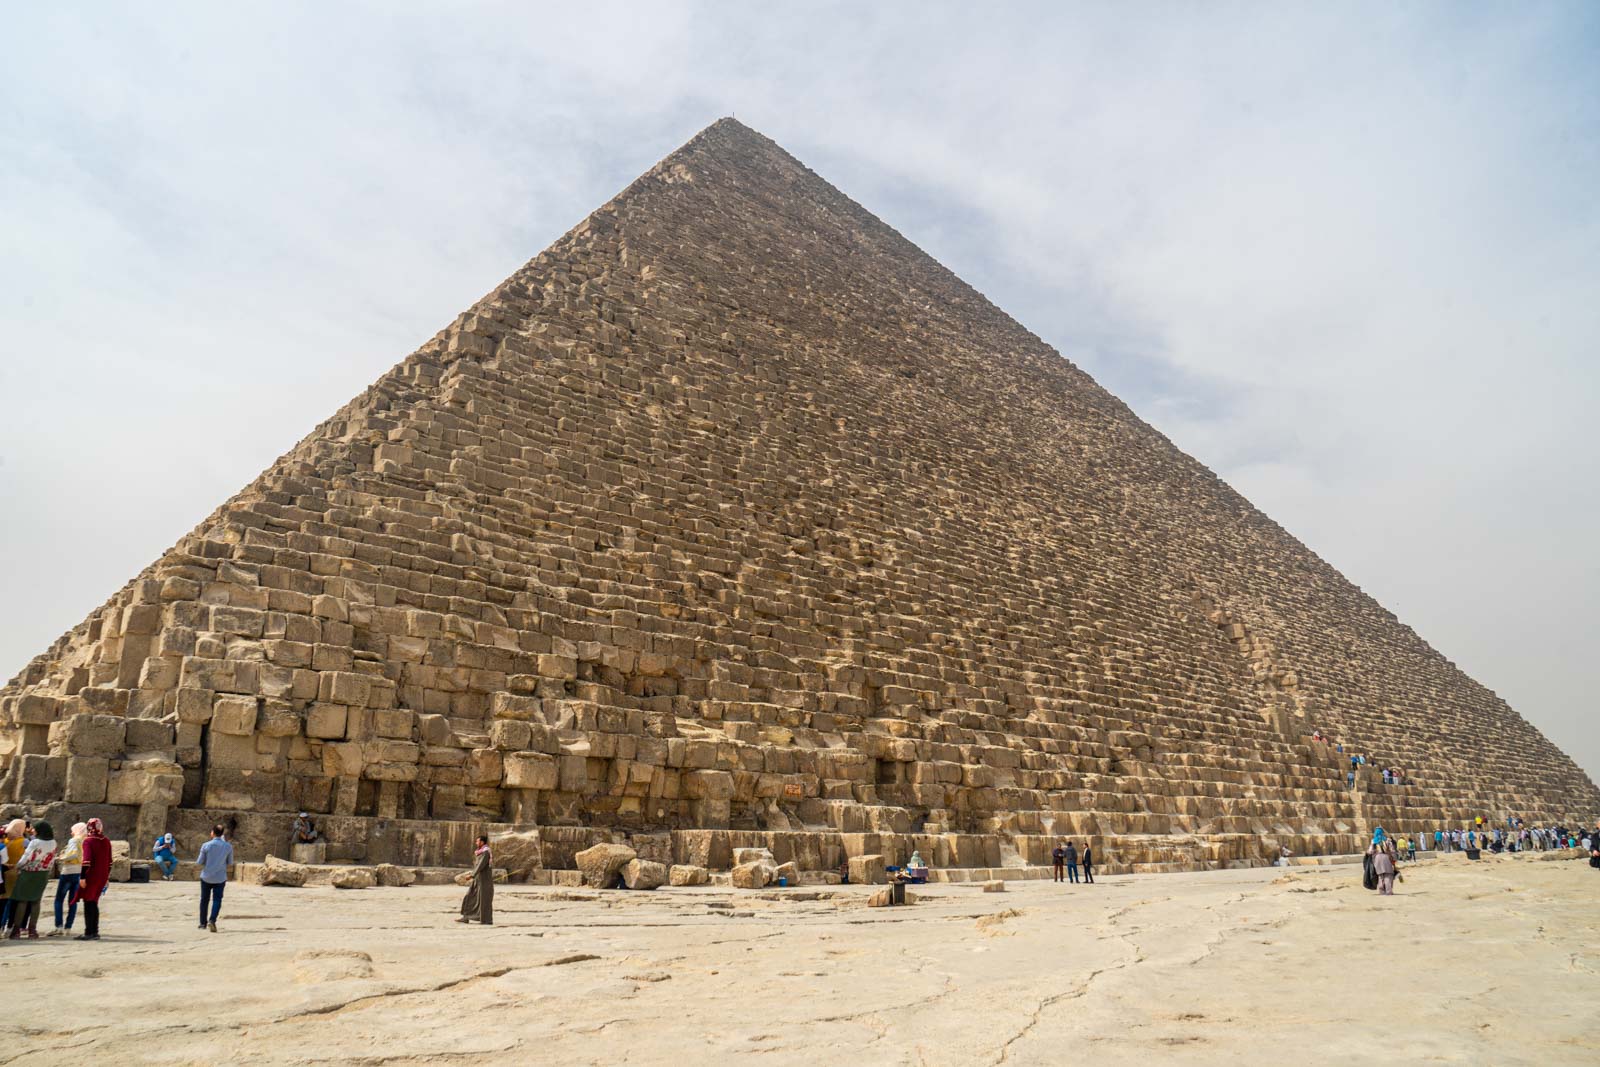 Visiting the Pyramids of Giza in Cairo, Egypt